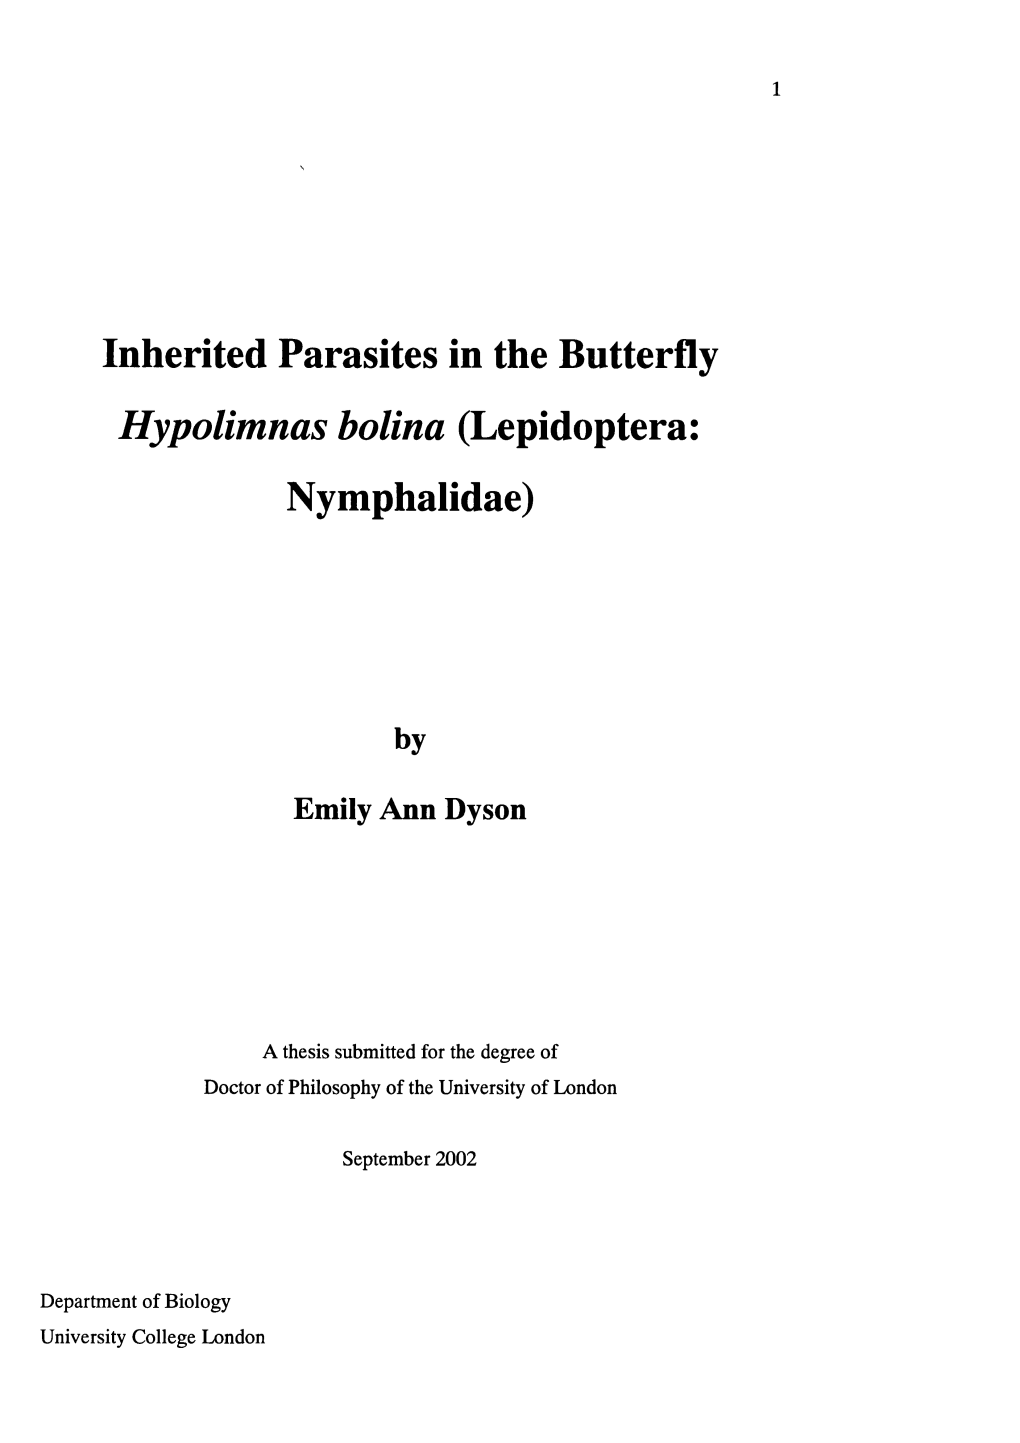 Inherited Parasites in the Butterfly Hypolimnas Bolina (Lepidoptera: Nymphalidae)